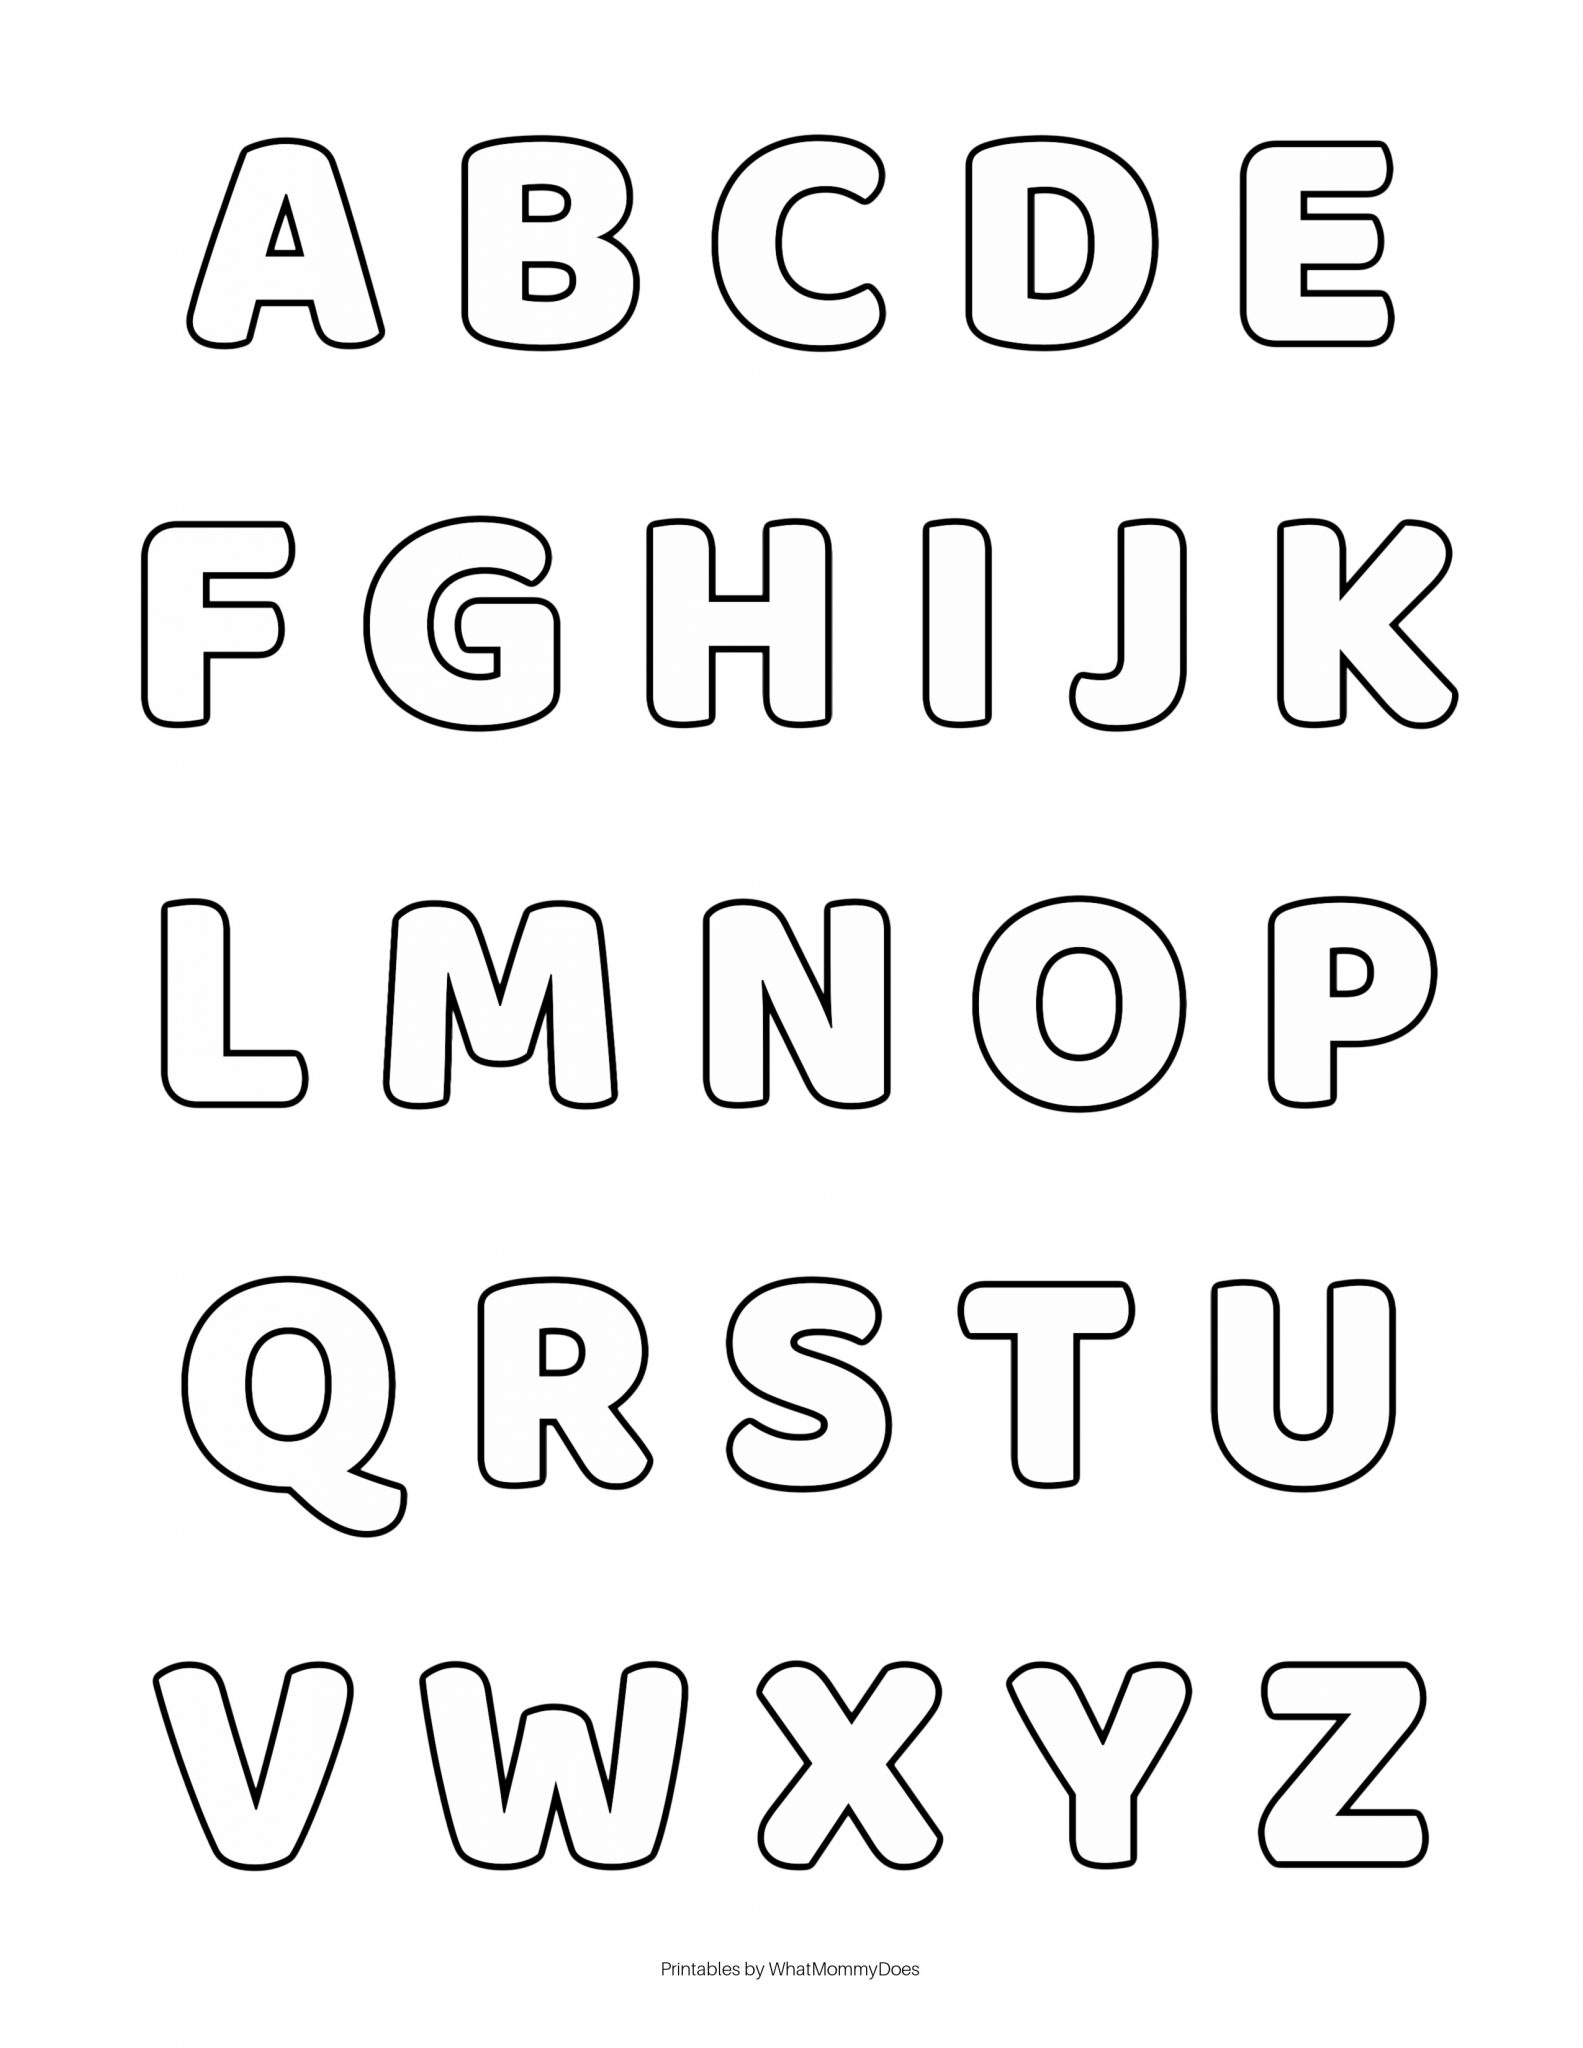 free-alphabet-printables-letters-worksheets-stencils-abc-flash-cards-what-mommy-does